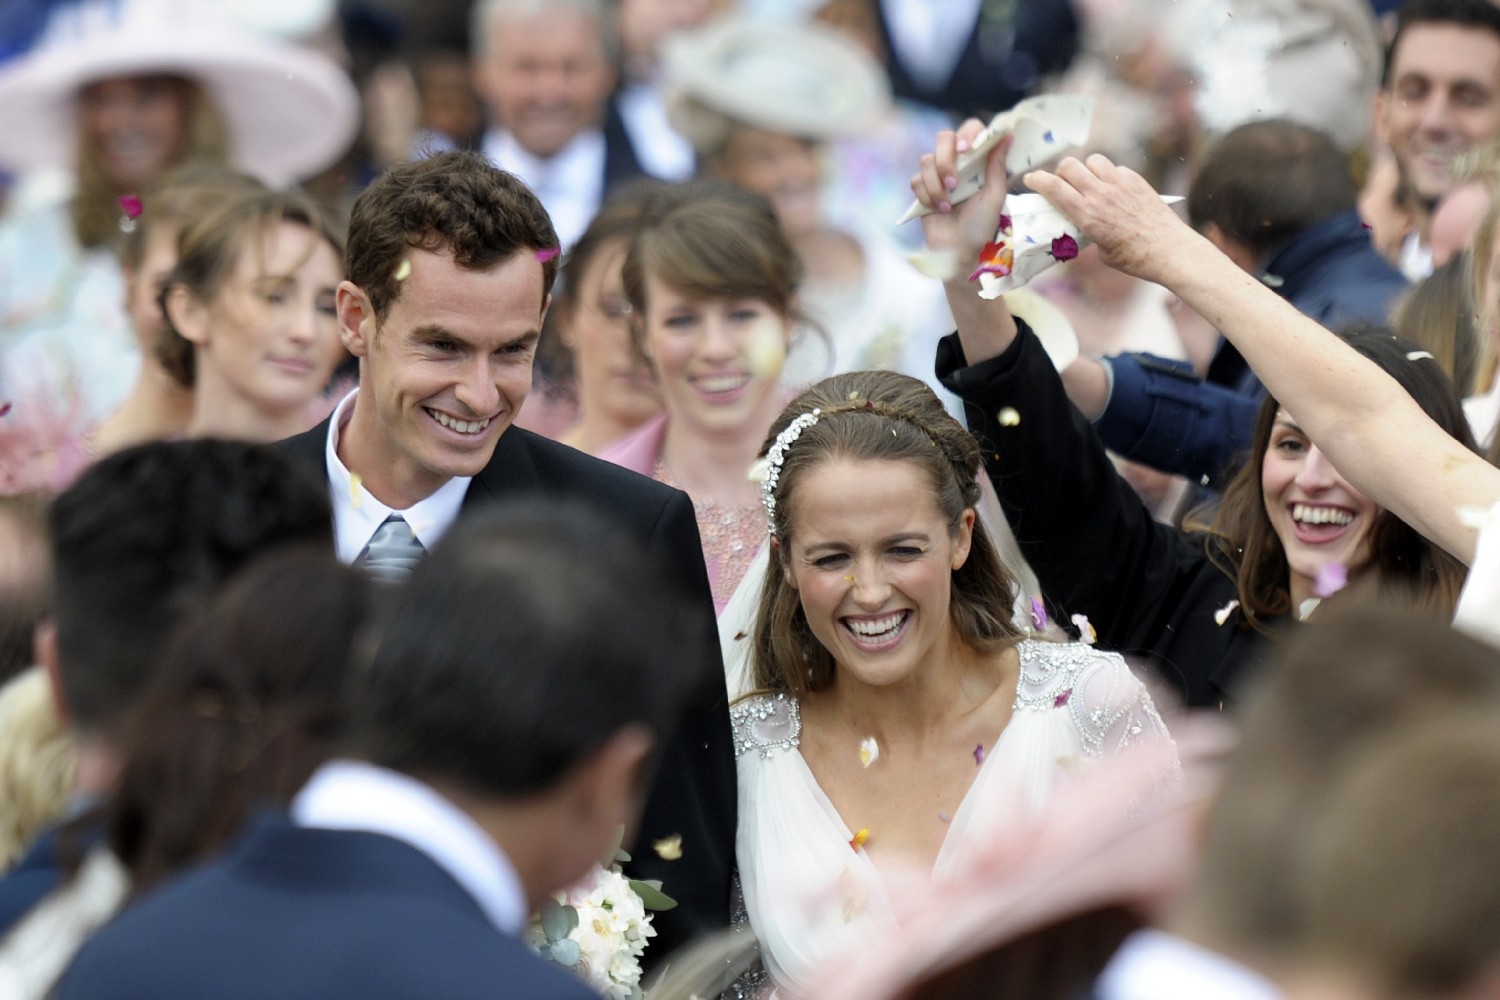 A Look Back At Andy Murray And His Wife Kim Sears’ 18 Year Relationship